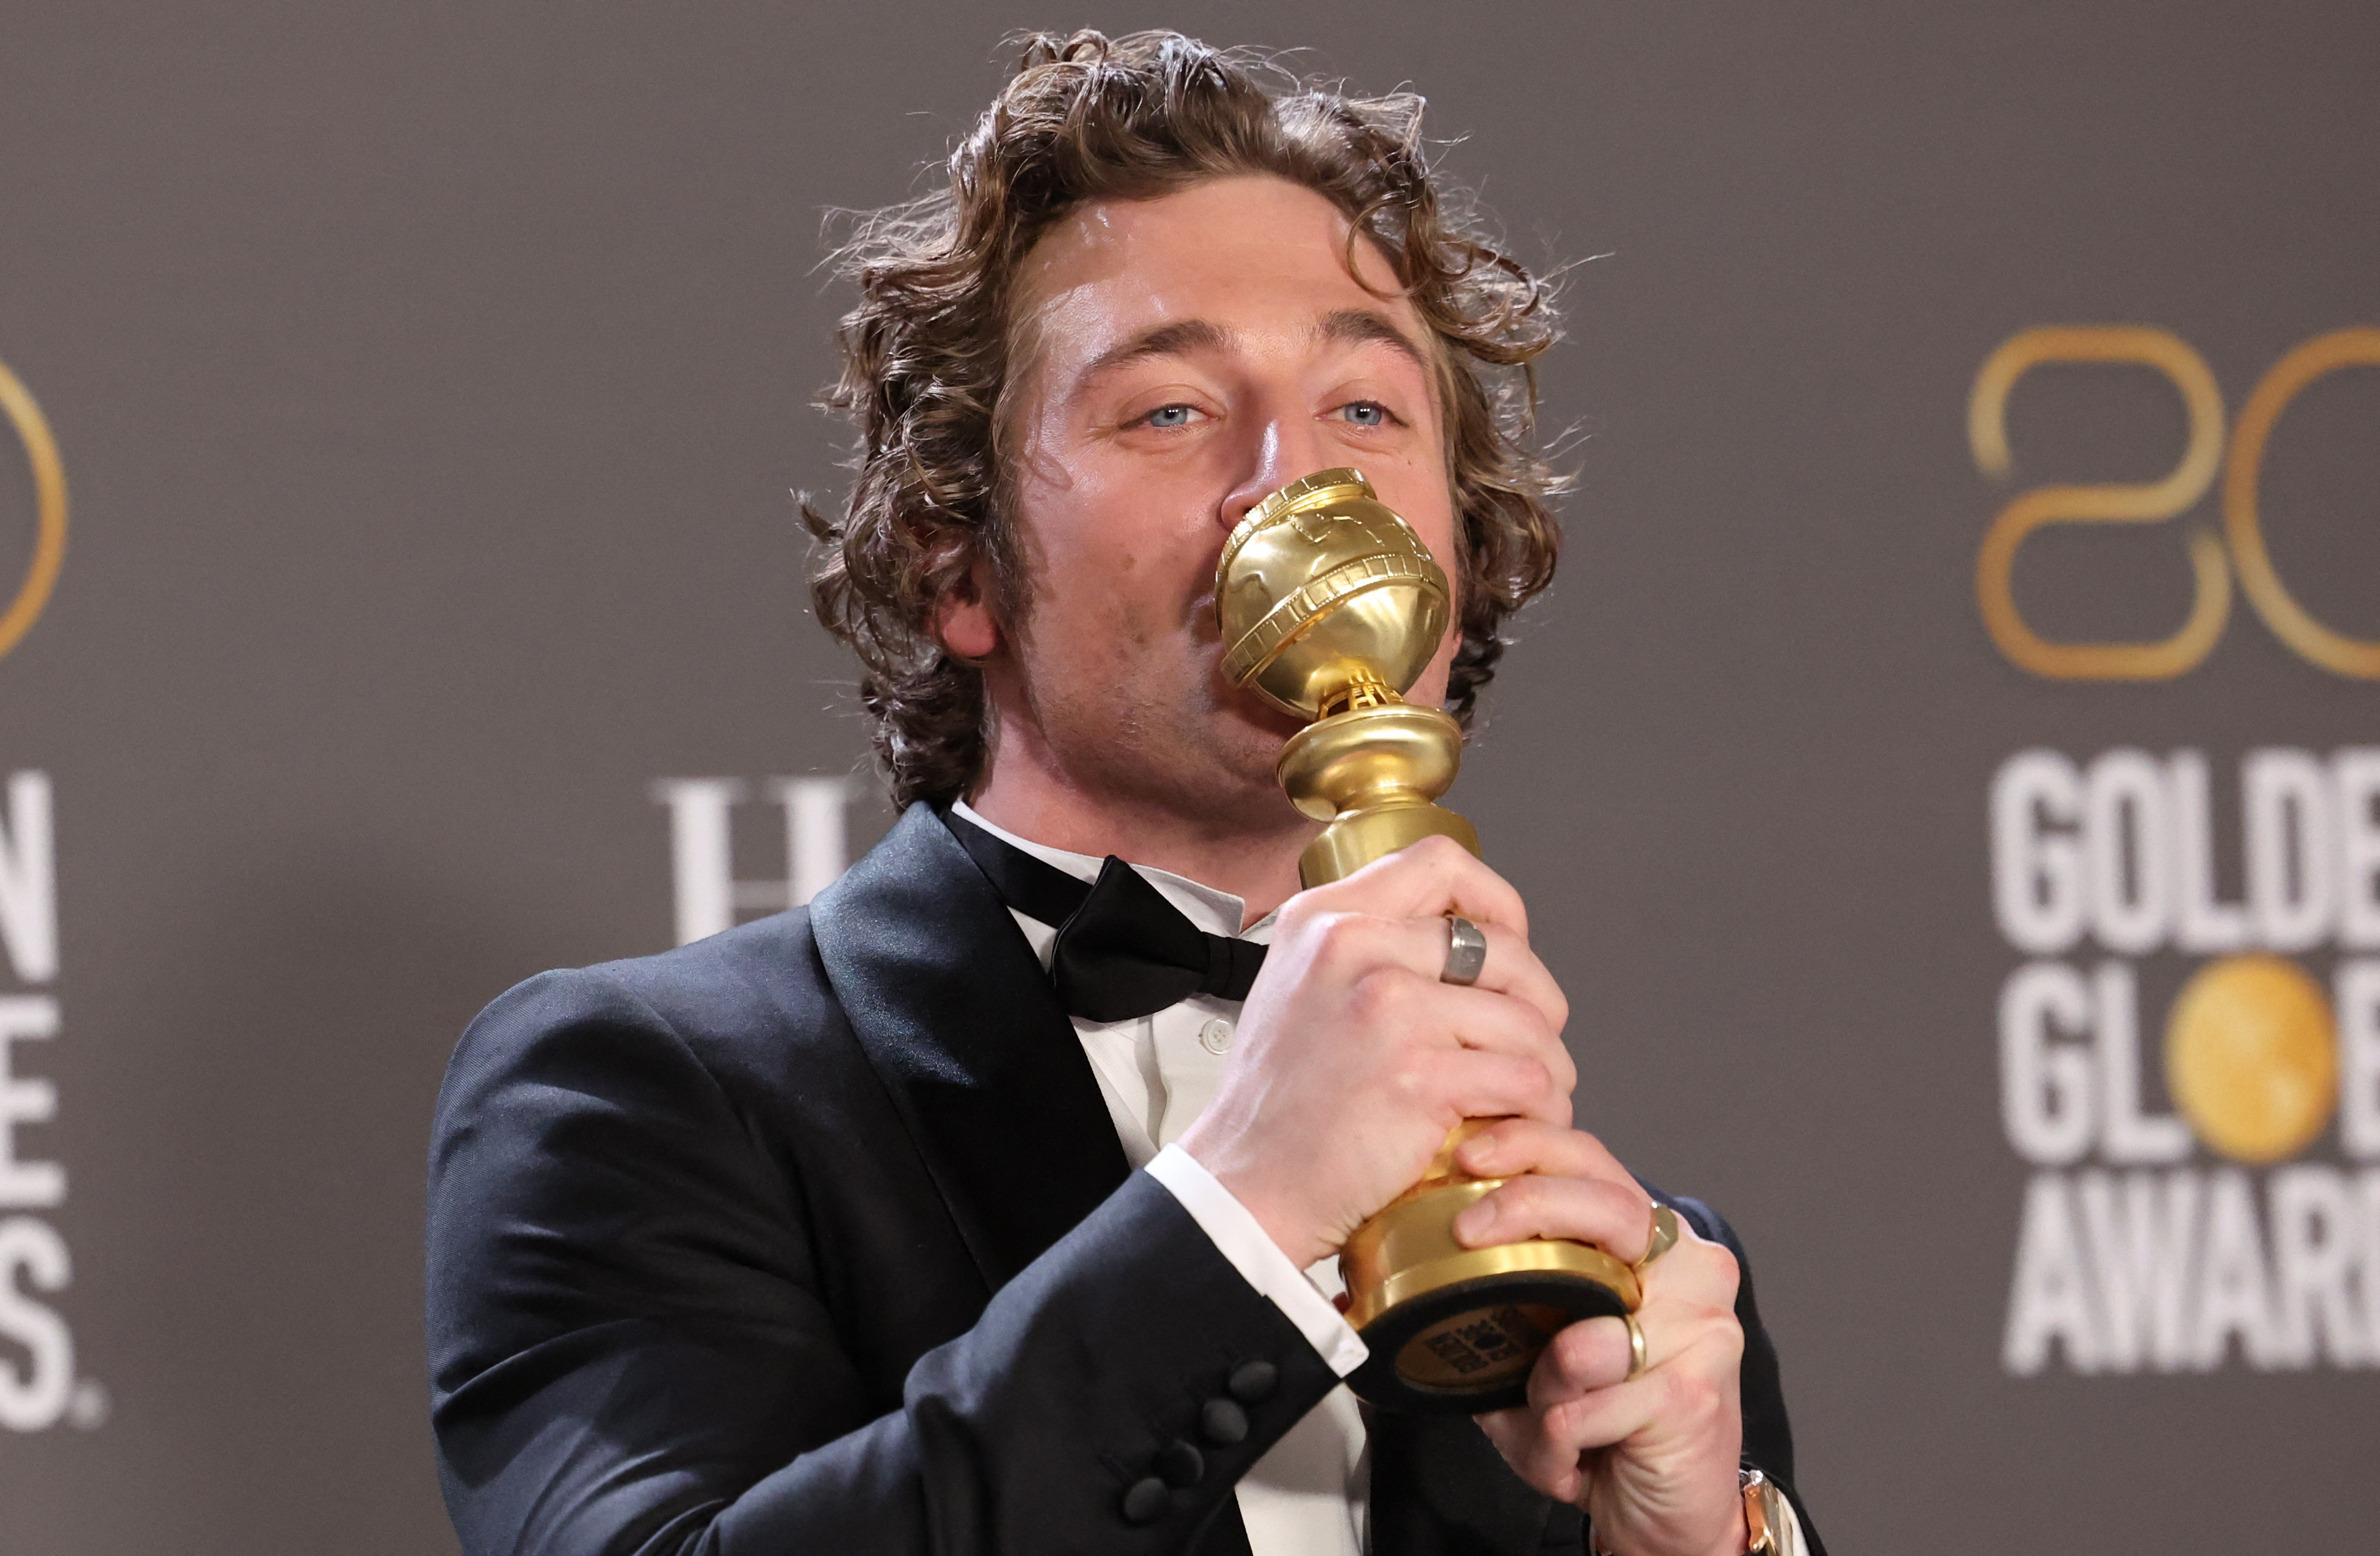 Jeremy Allen White poses with his award for Best Actor in a Musical or Comedy TV series for "The Bear" at the 80th Annual Golden Globe Awards in Beverly Hills, California, U.S., January 10, 2023. REUTERS/Mario Anzuoni